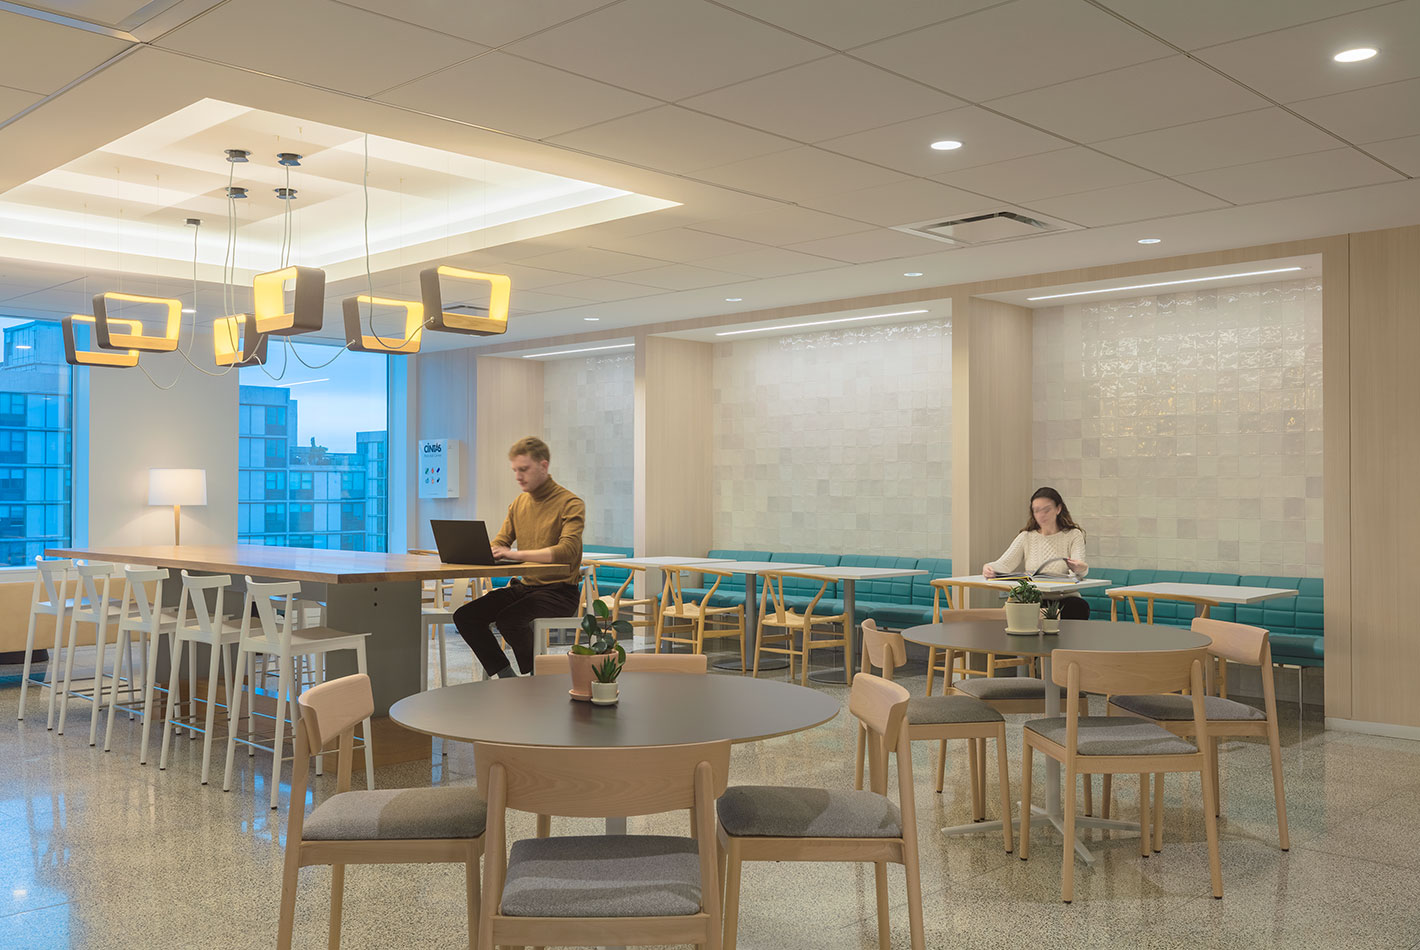 The employee cafeteria at J Crew Headquarters has multiple seating areas, including a long upholstered banquette on one wall.